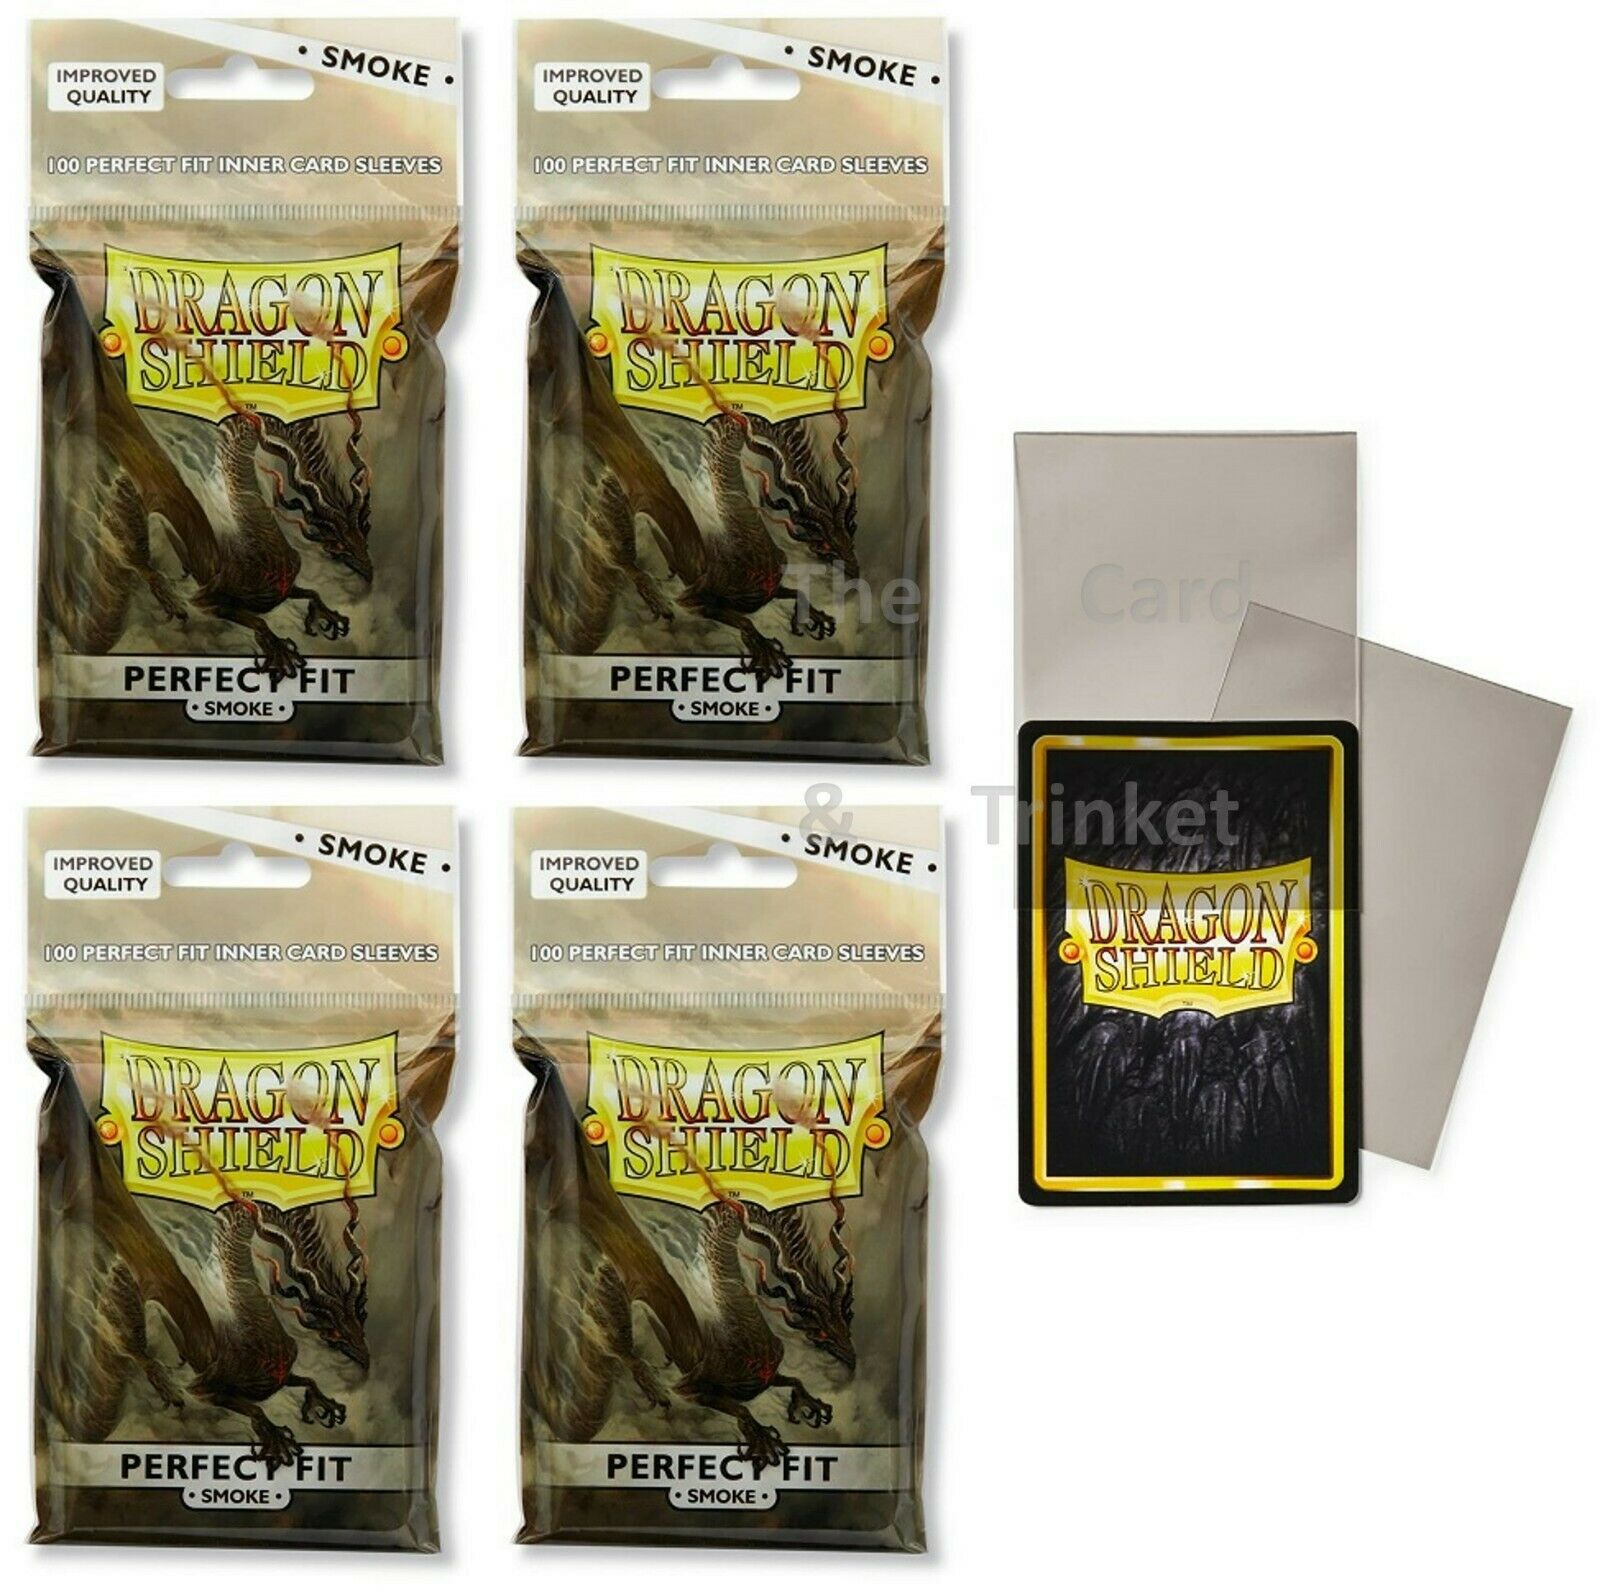 Dragon Shield Perfect Fit Clear/Smoke Inner Sleeves